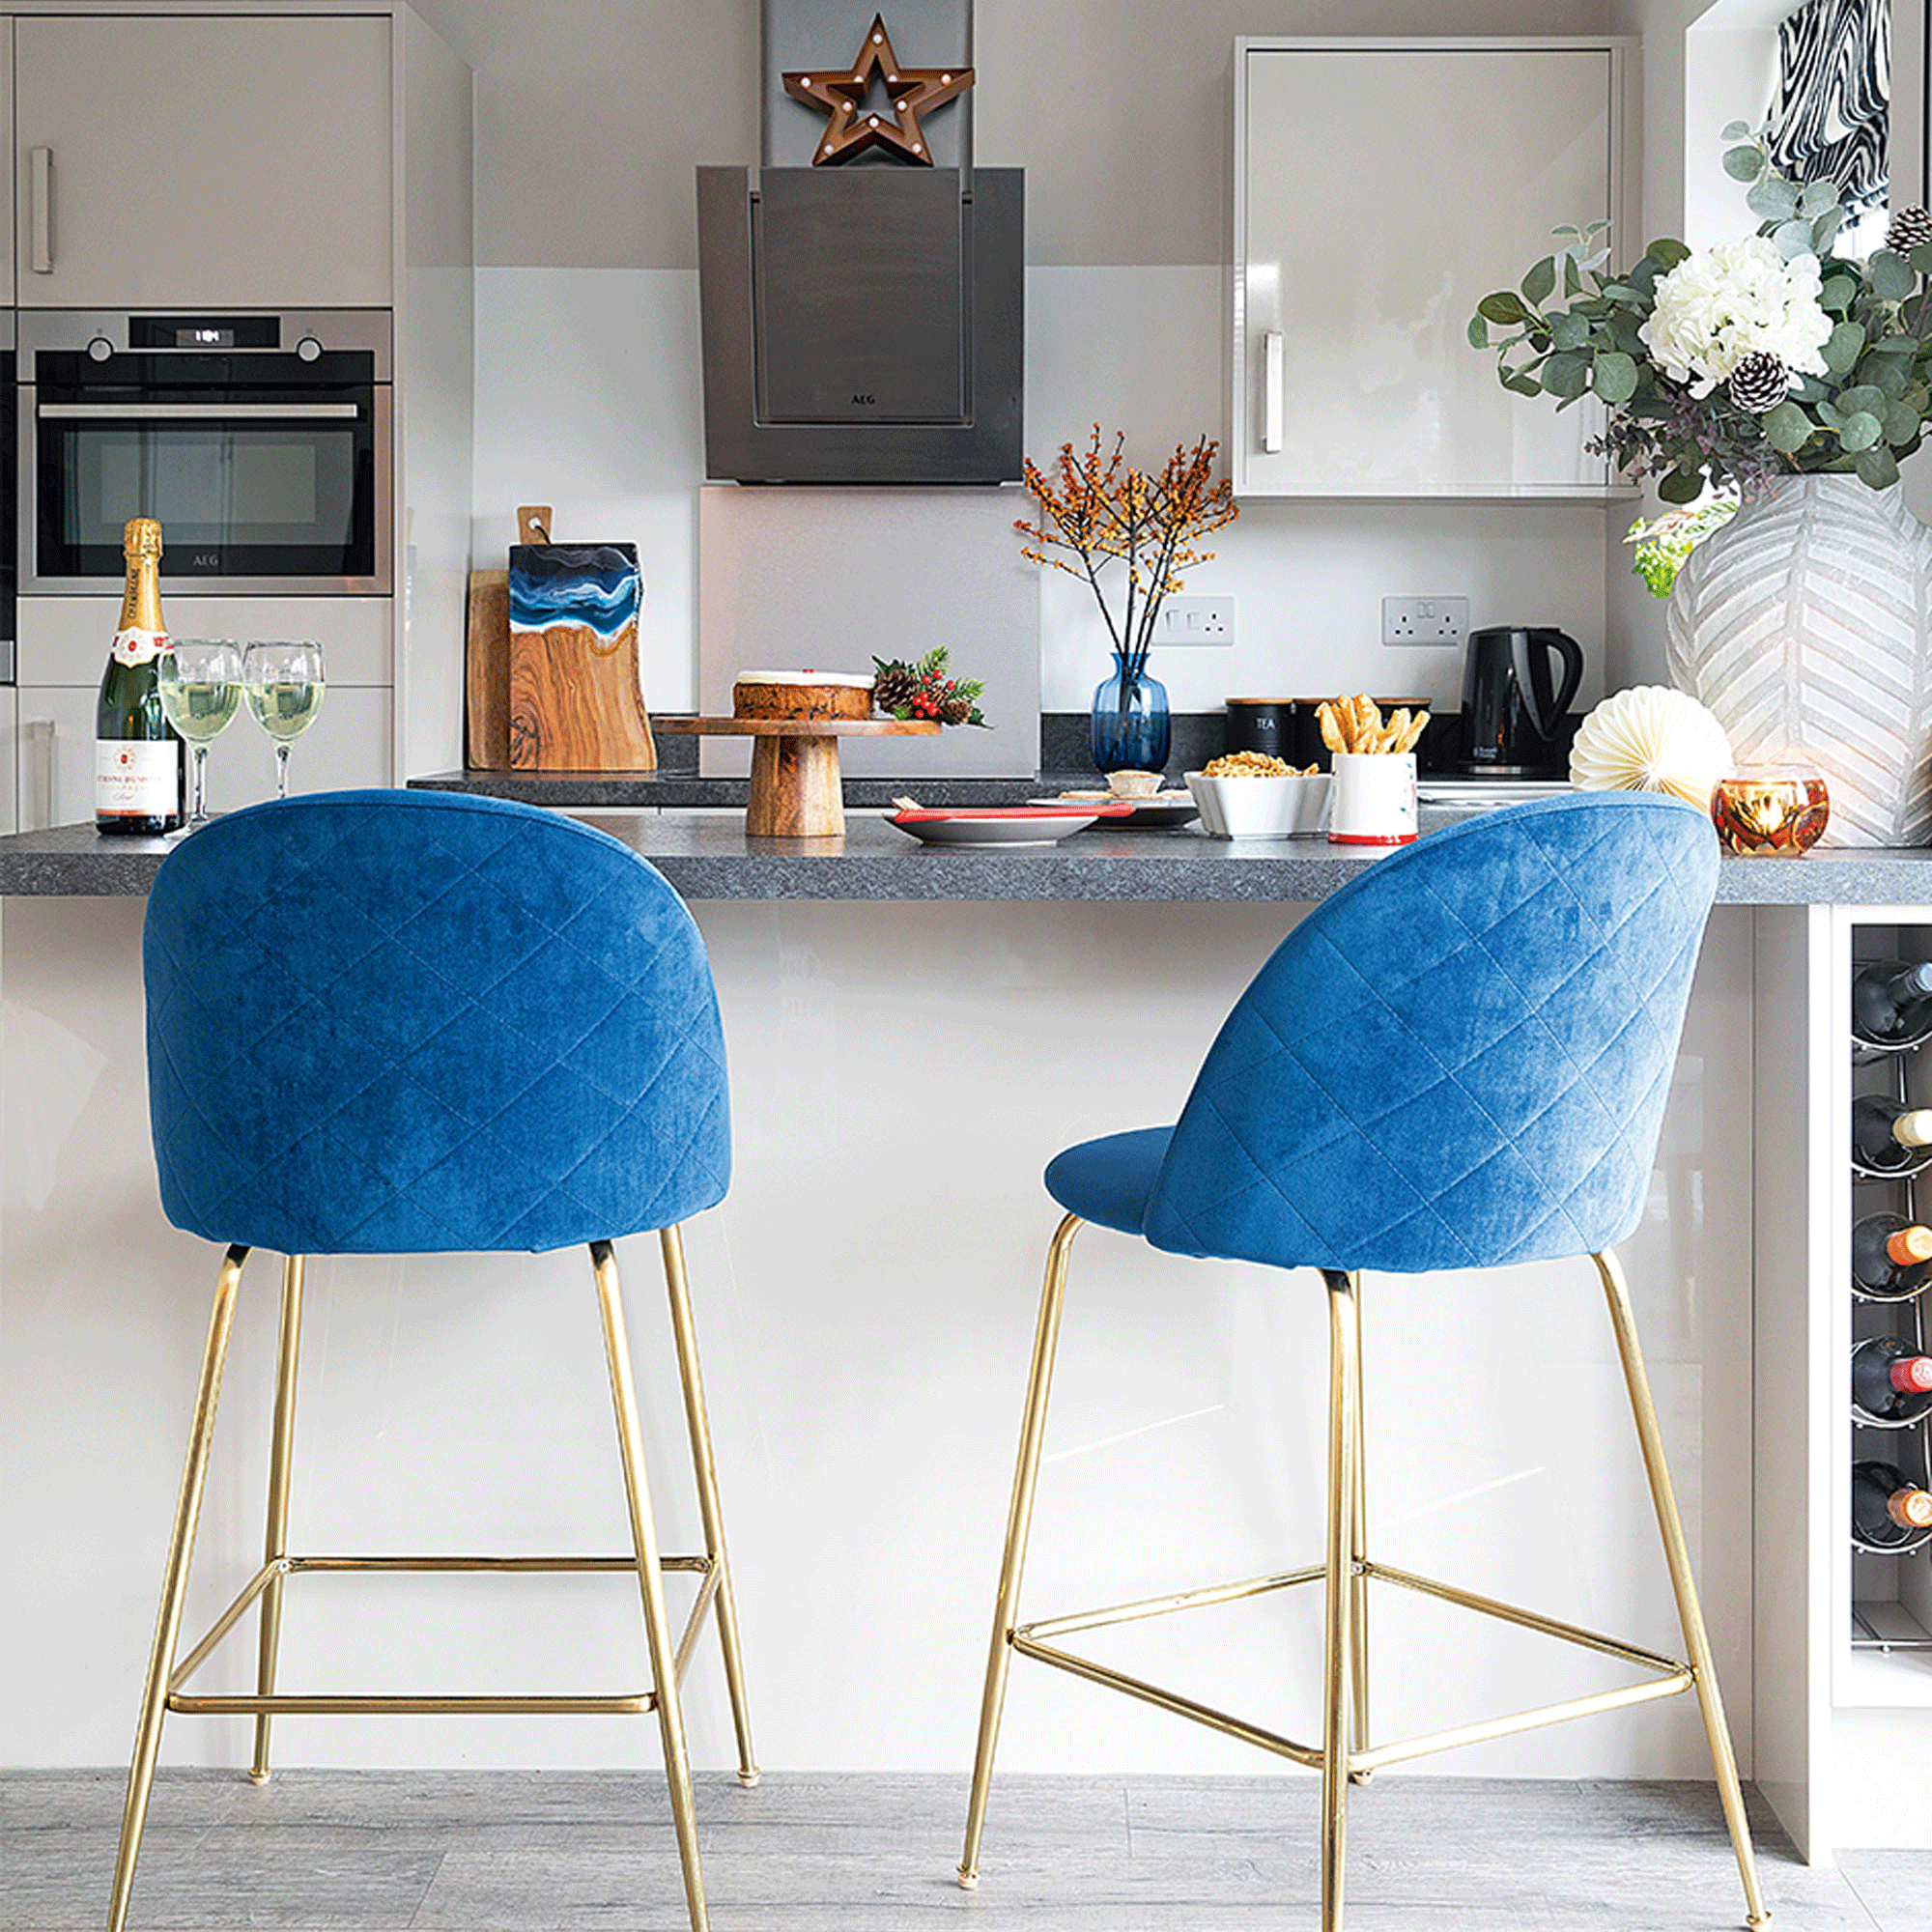 breakfast bar with blue chairs